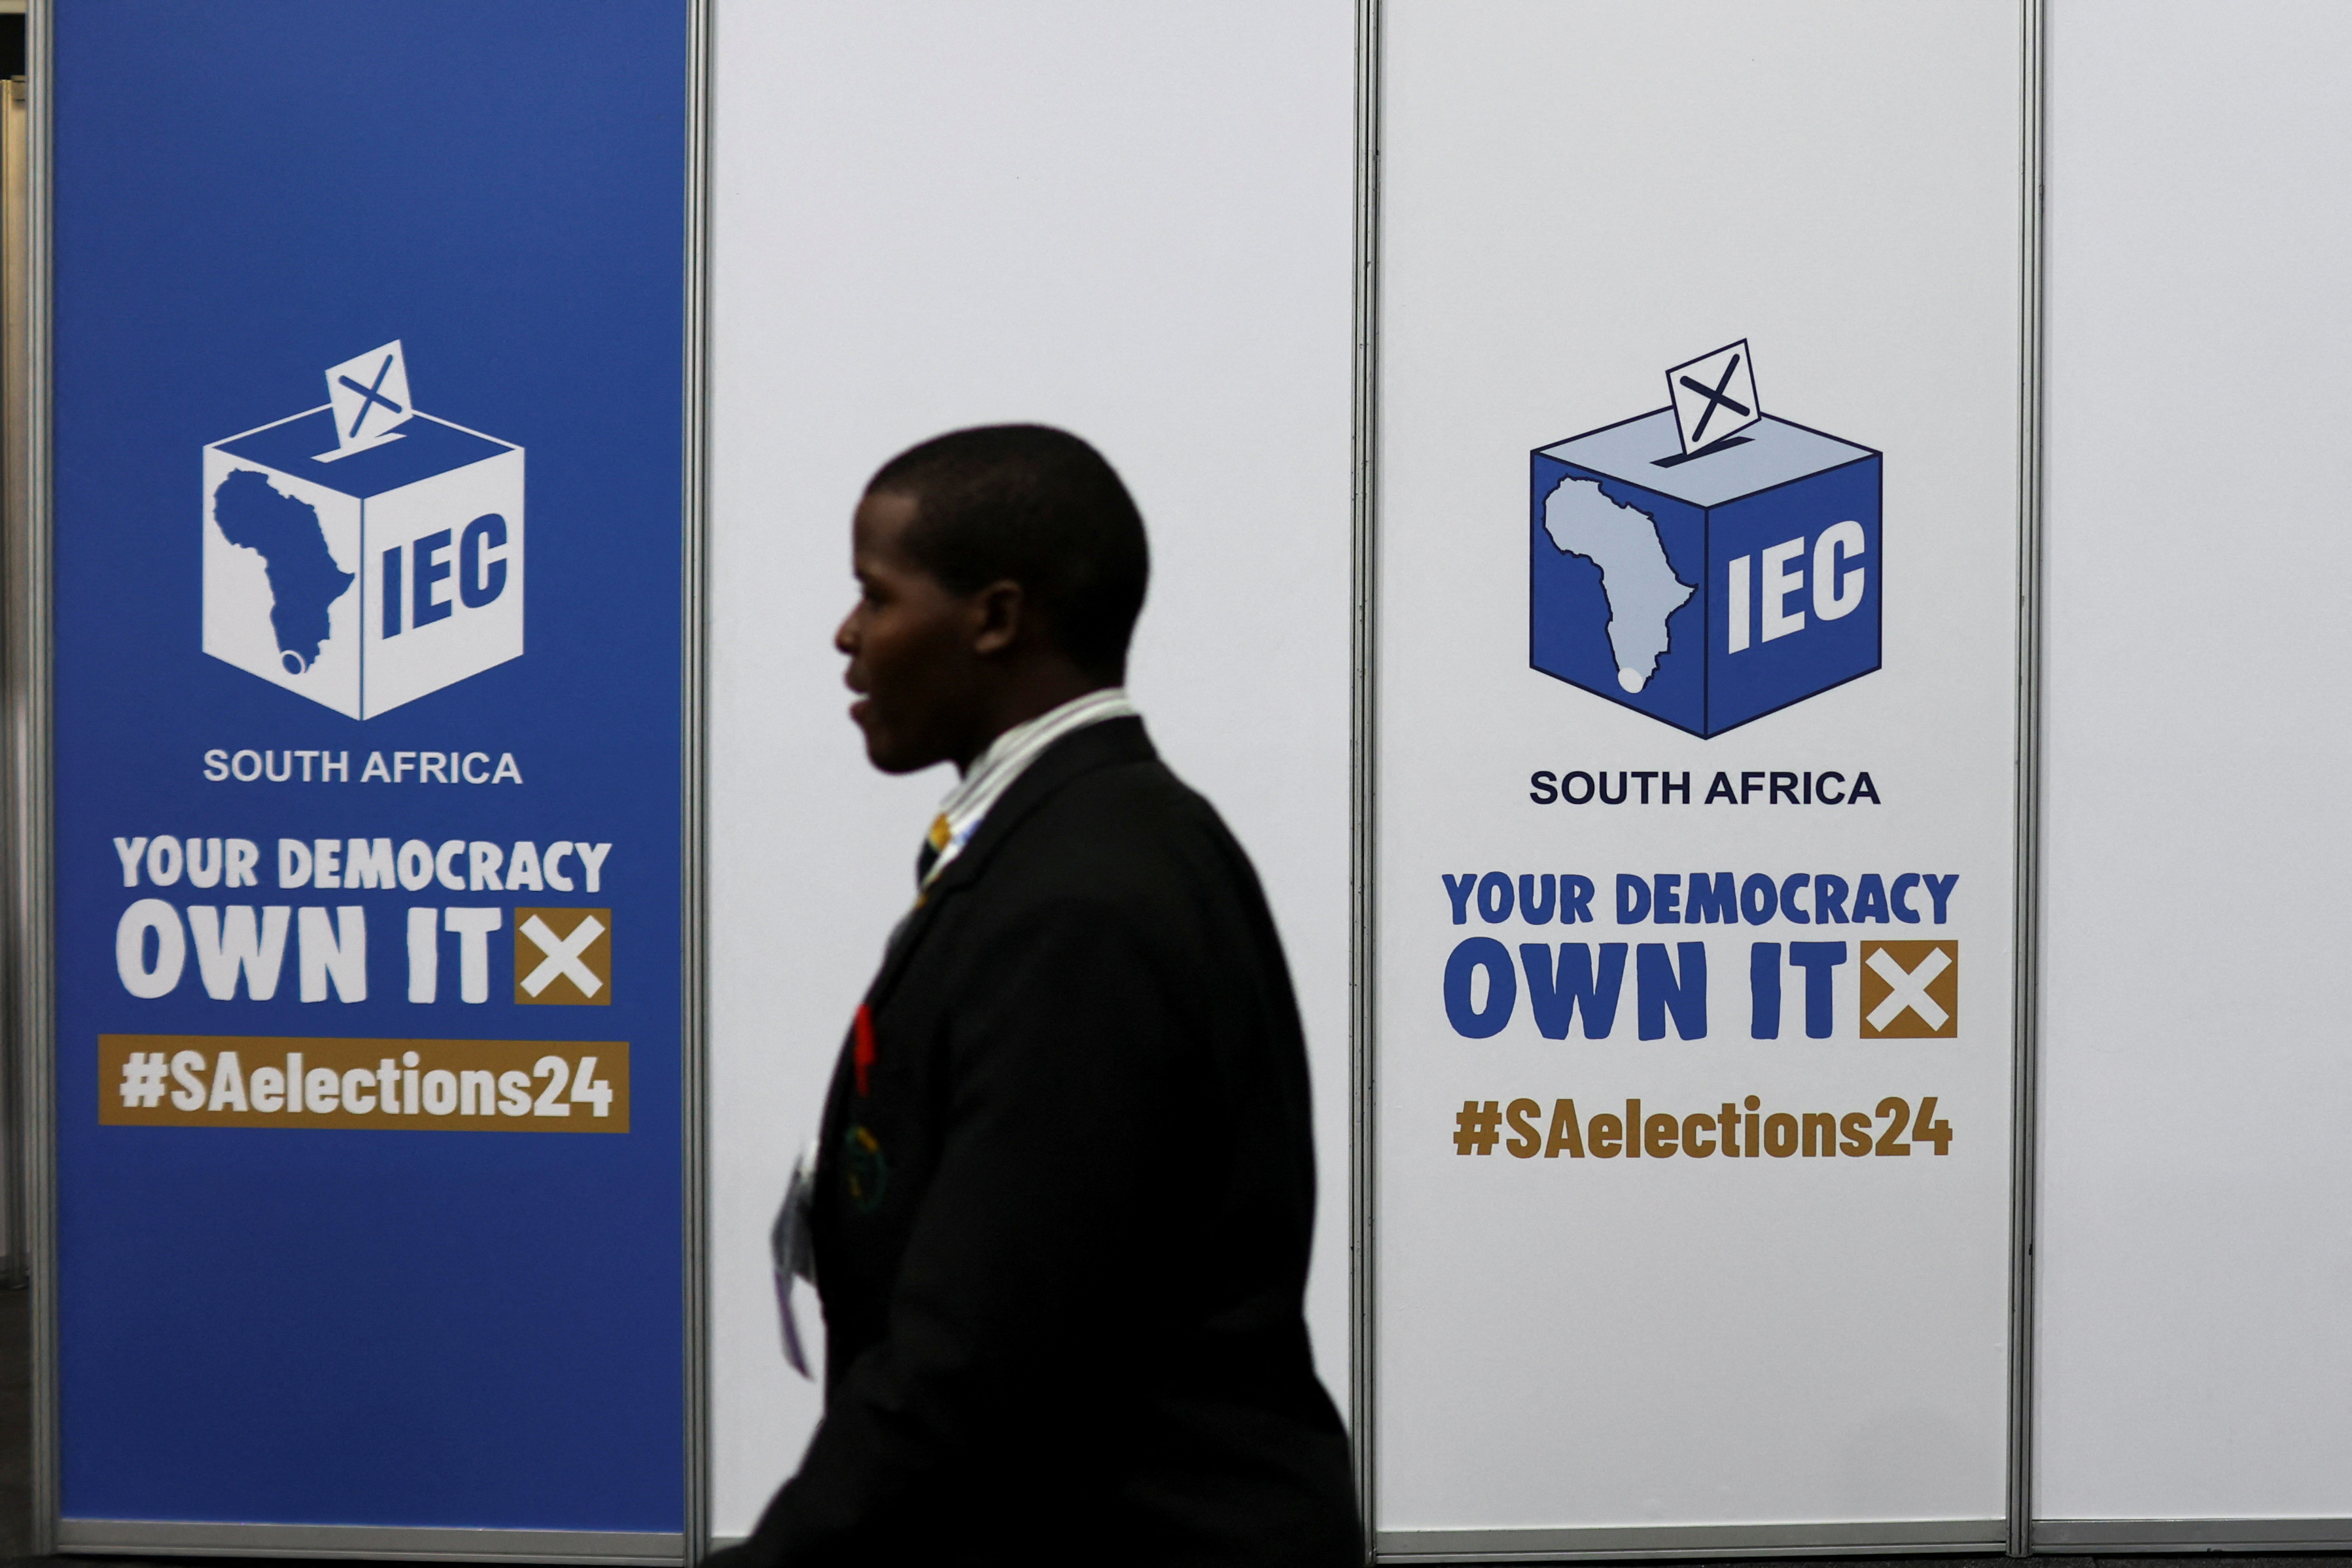 Opening ceremony of the National Results Operation Centre of the Electoral Commission of South Africa (IEC) in Midrand